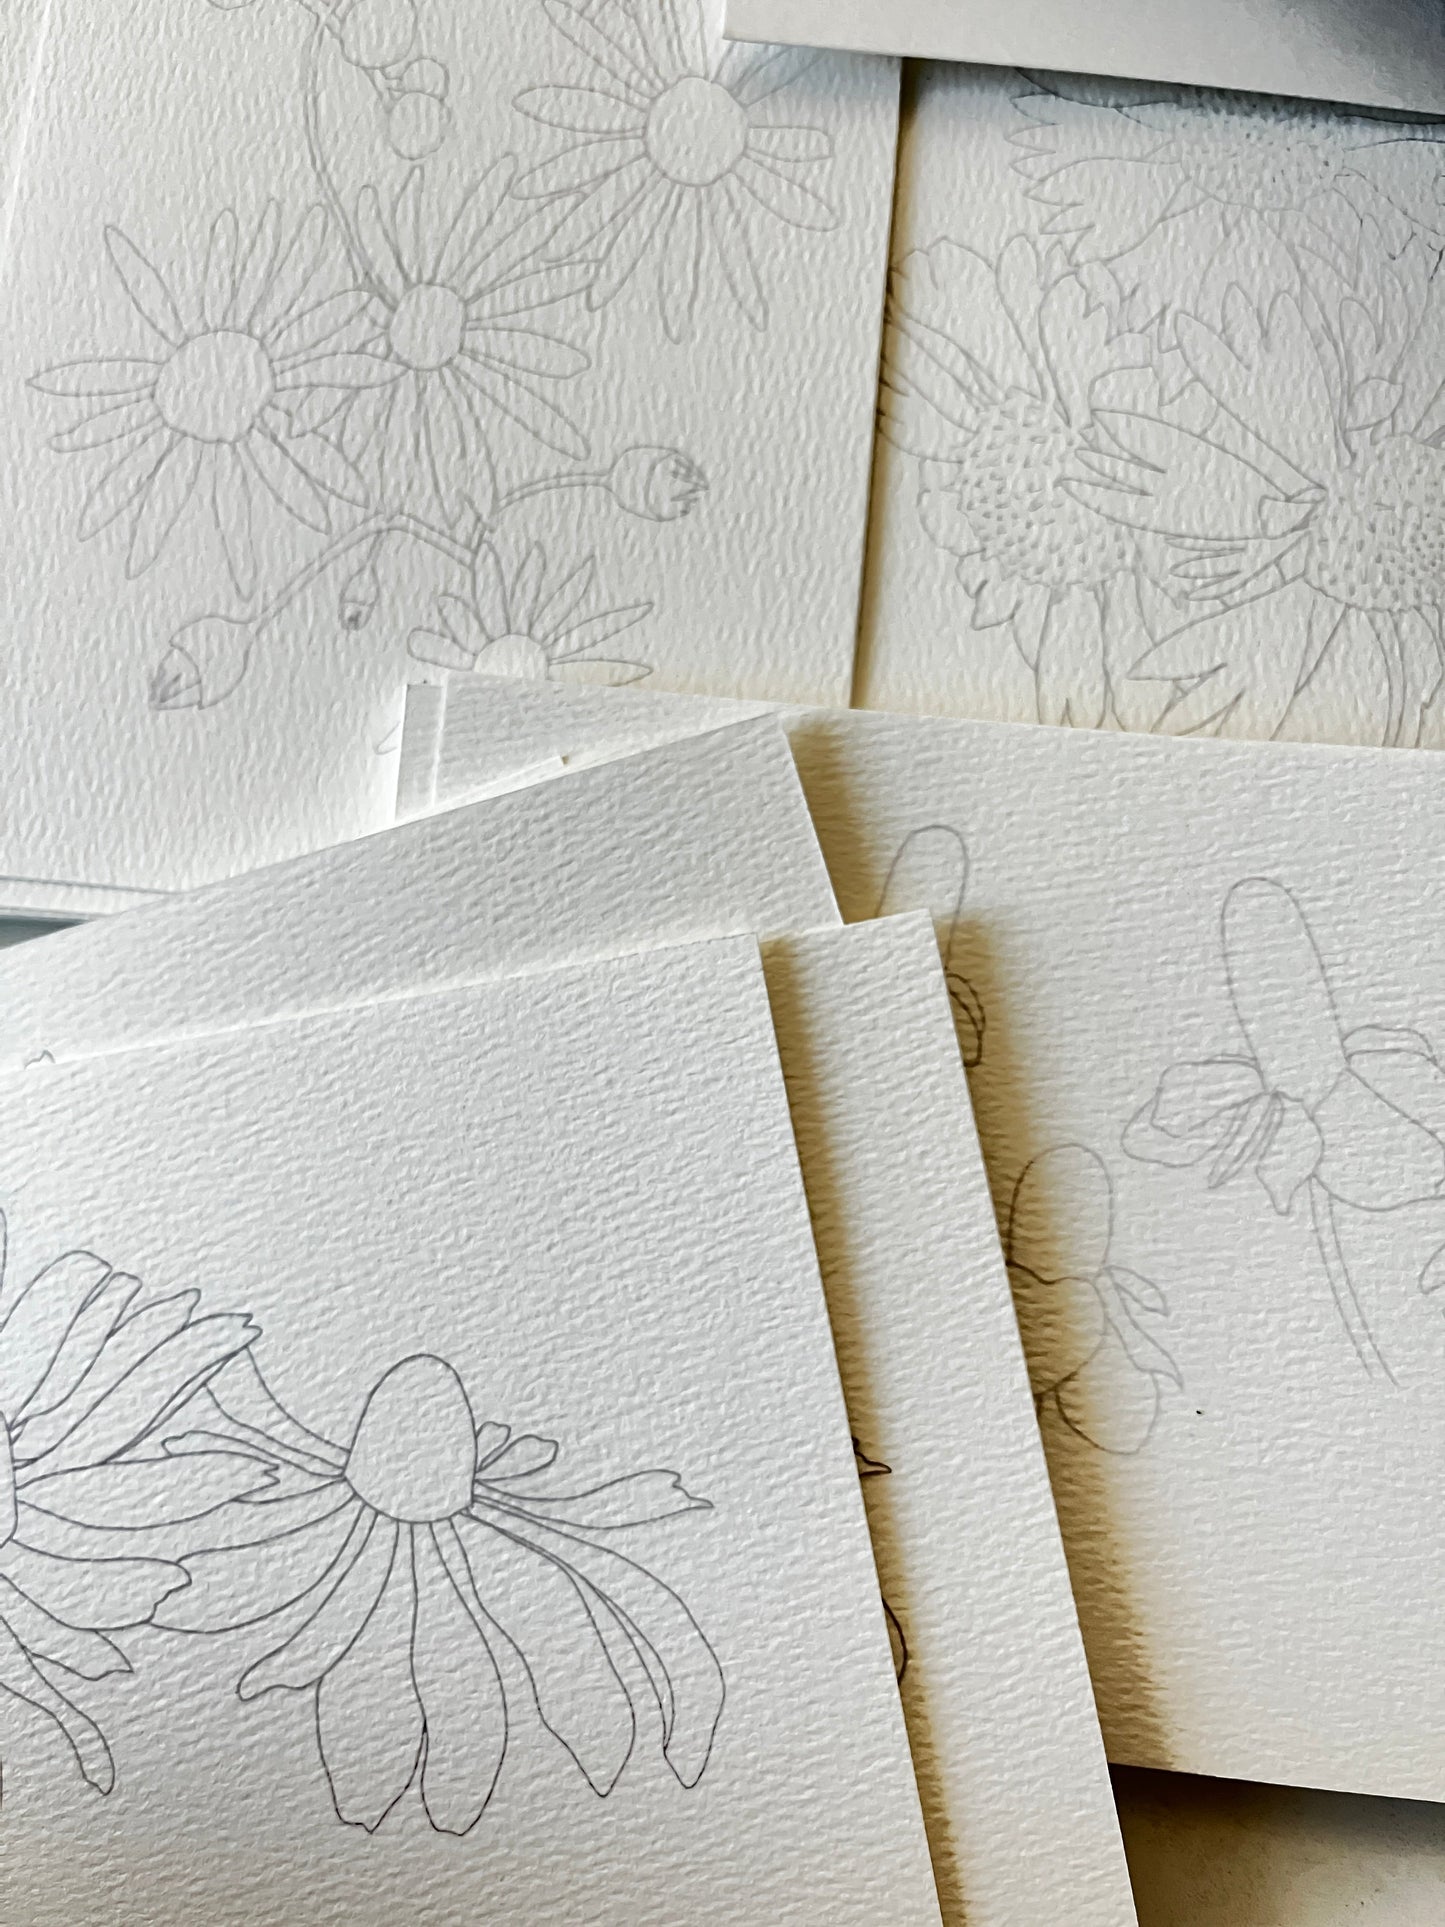 Ready-to-Paint Watercolor Pages: Secret Garden